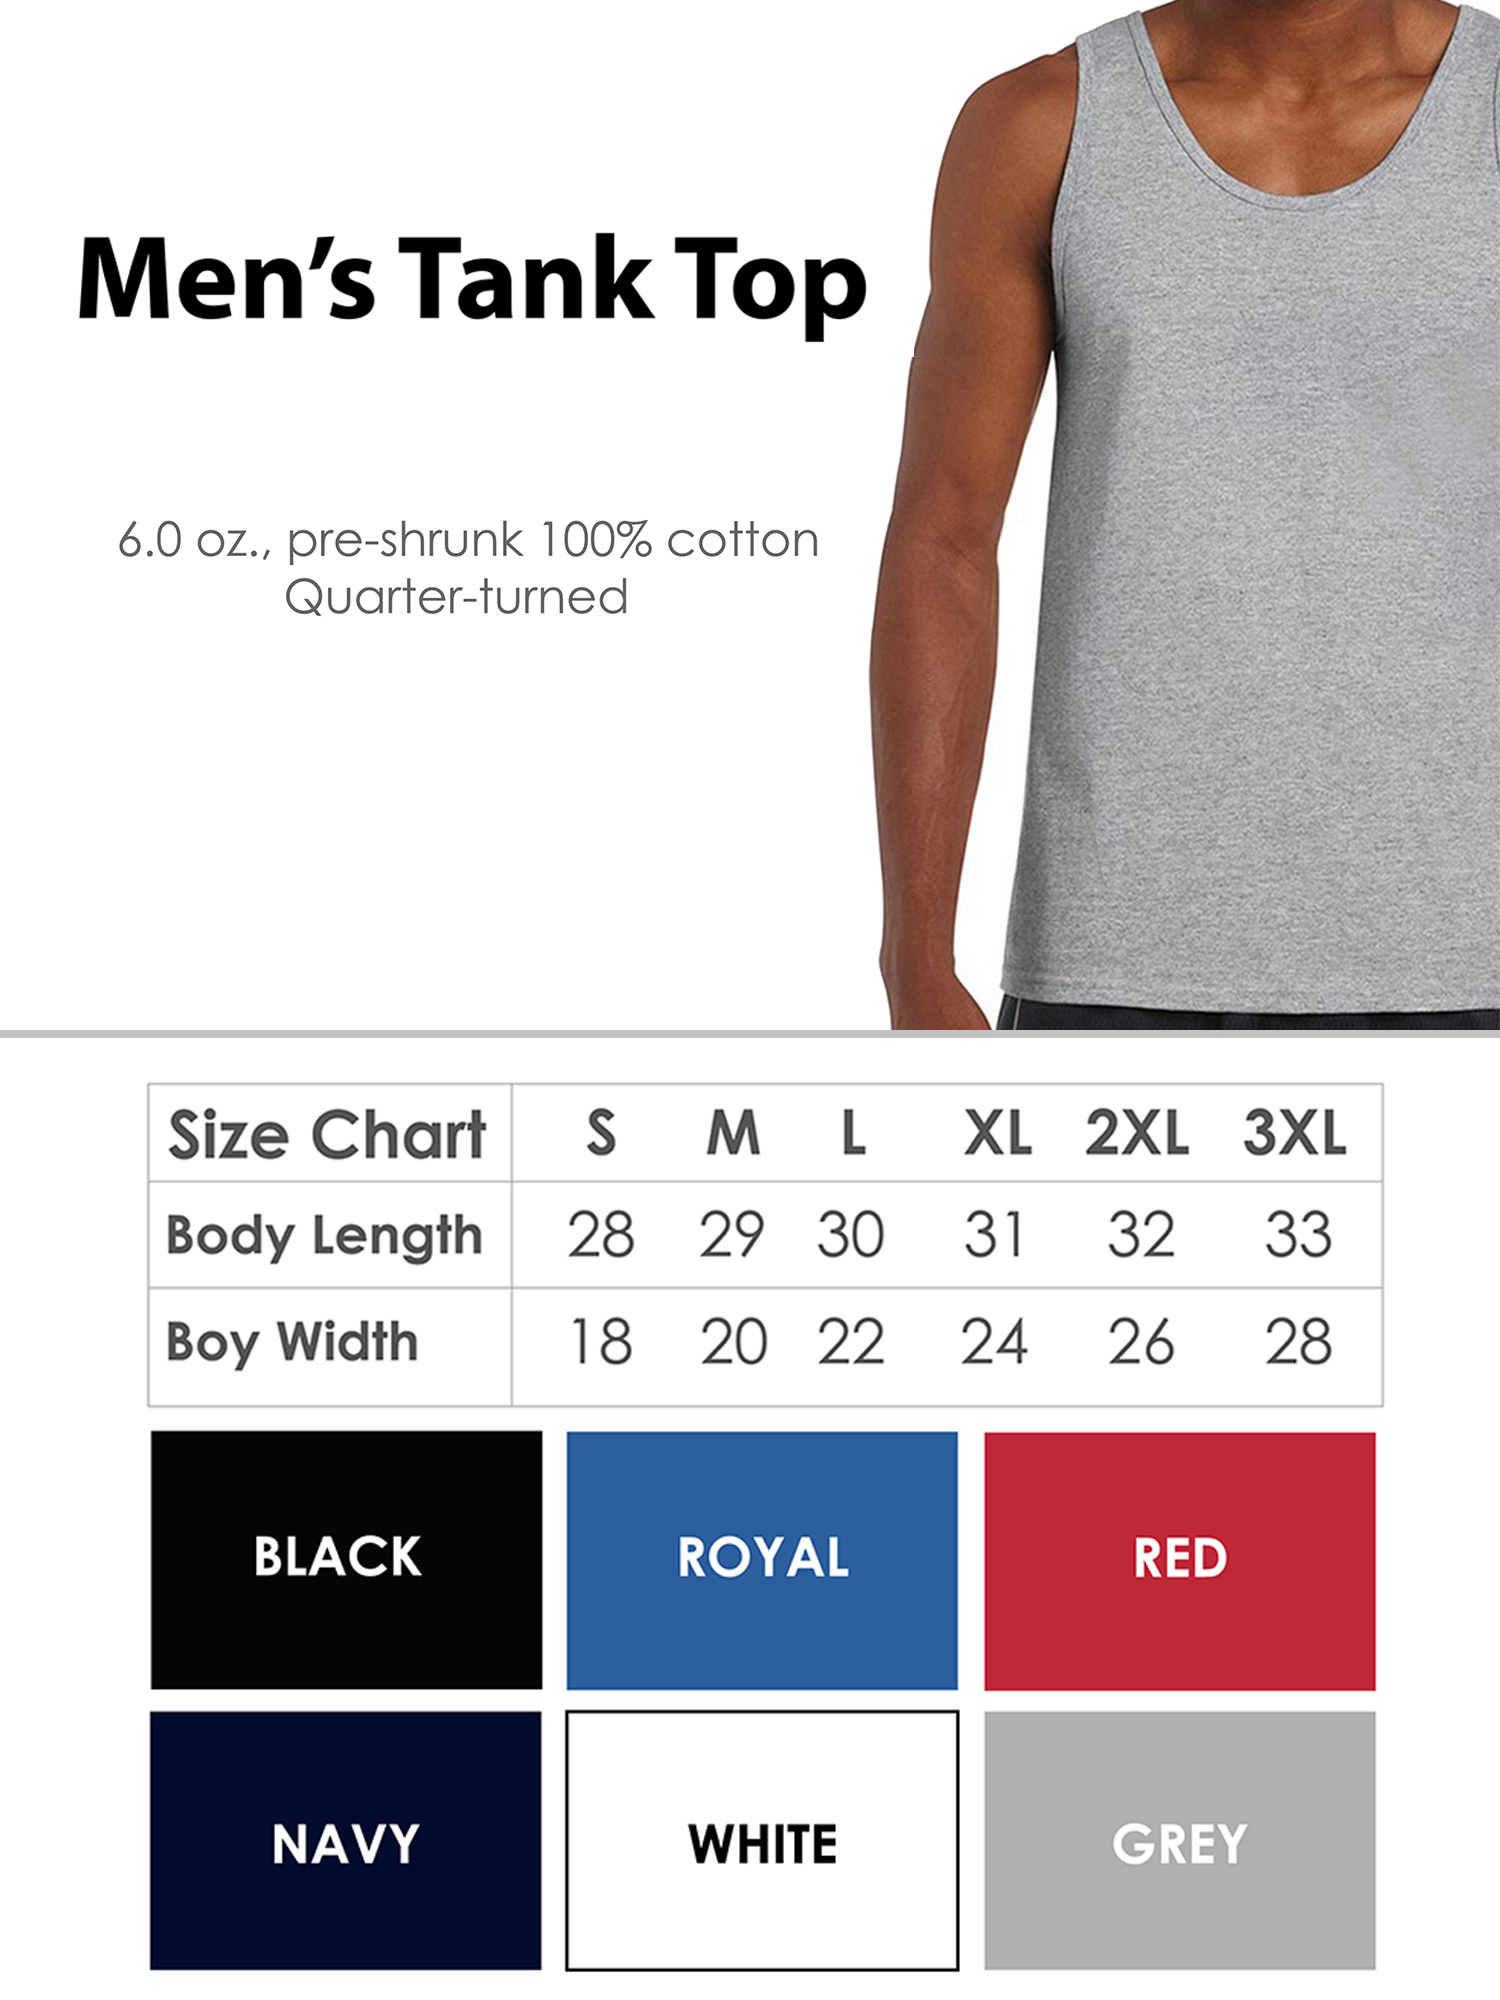 Awkward Styles Elephant Tank Top for Men Patterned Tanks for Men Men's Fashion Collection Tracery Tank Top for Dad Indian Pattern T-Shirt for Men Gifts for Husband Elephant Shirts Animal T-Shirt - image 4 of 4